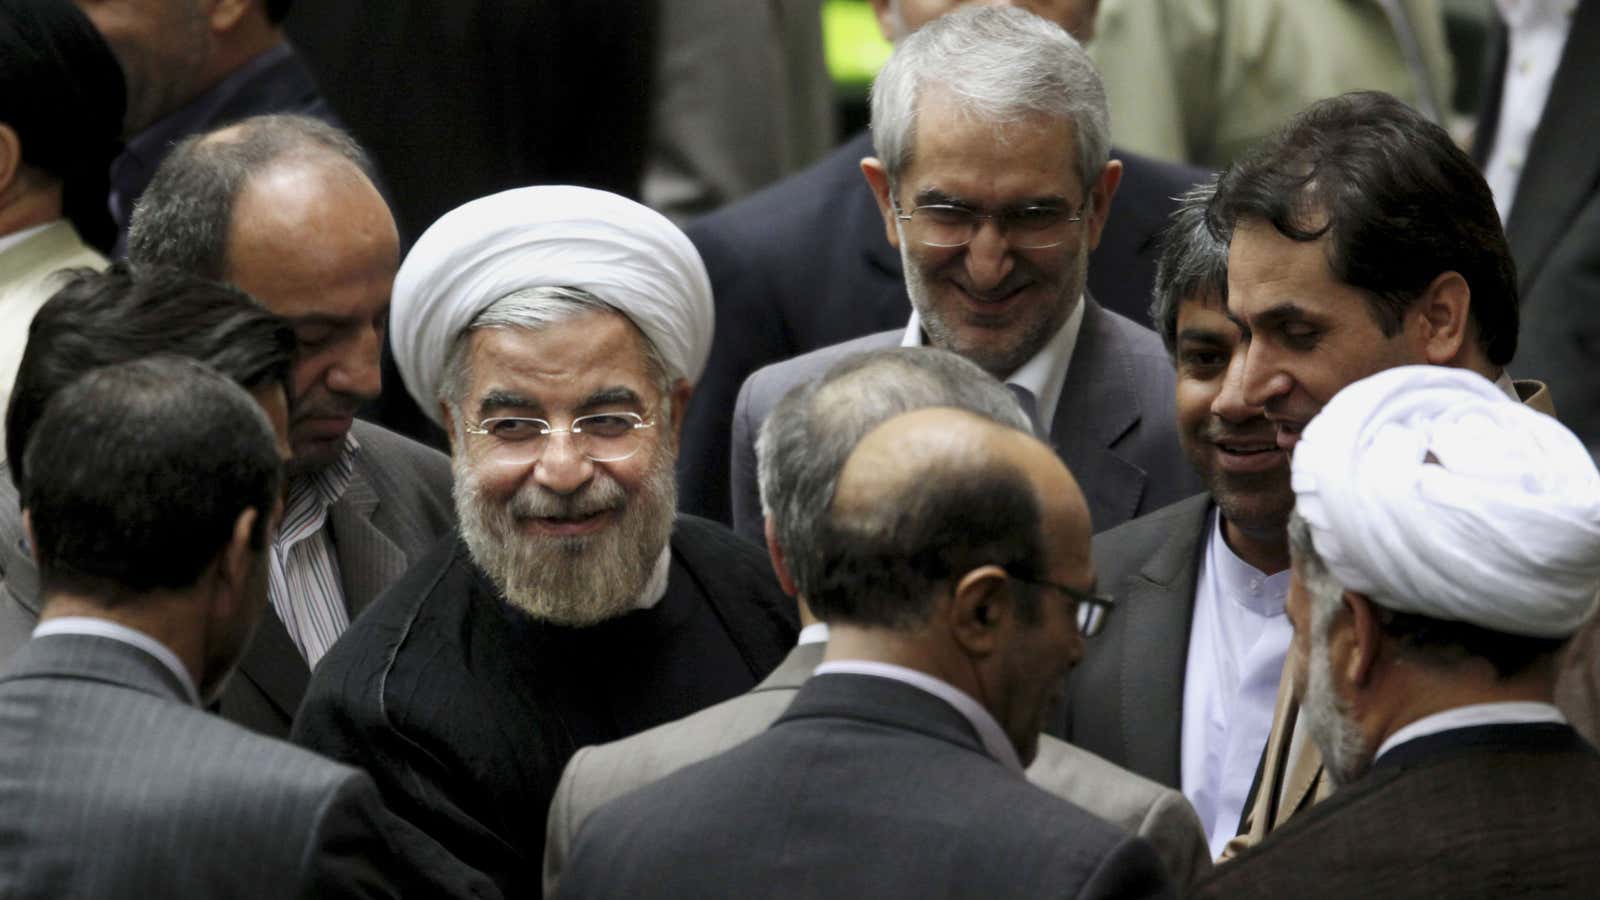 Iranian scientists are effectively considered his employees.